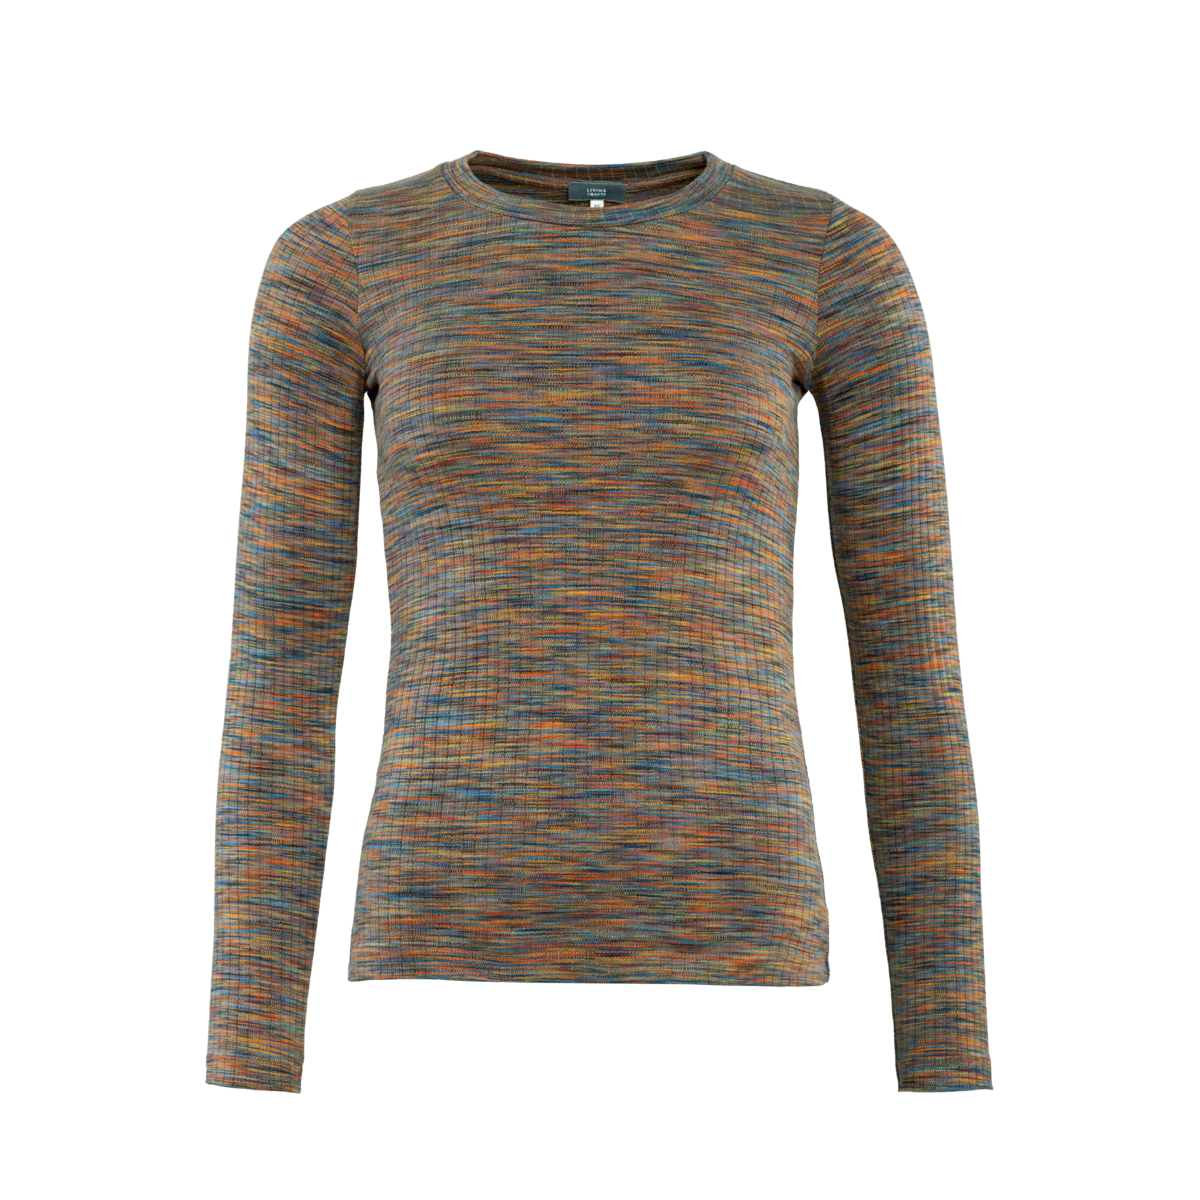 Multicolor Long-sleeved shirt, PRISCA